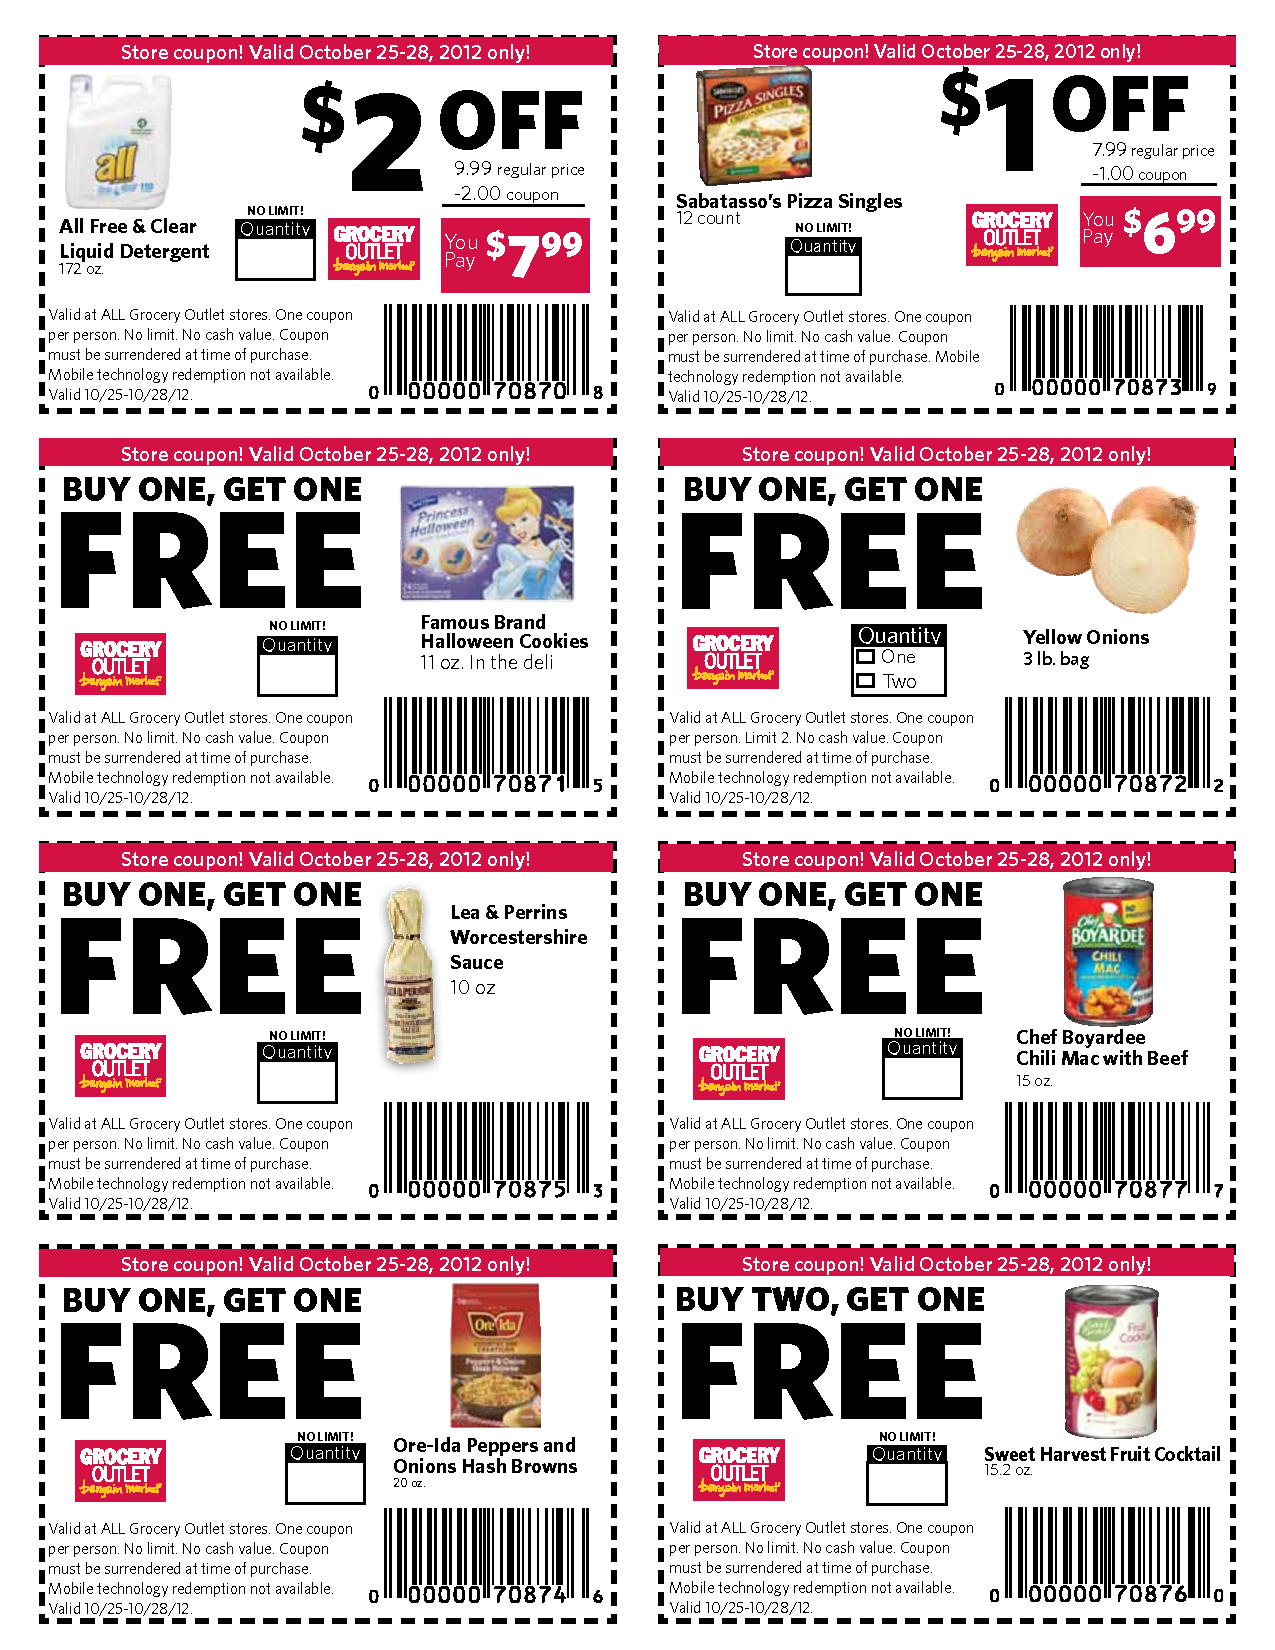 Supermarket Coupons | Printable Coupons Online - How To Get Free Printable Grocery Coupons